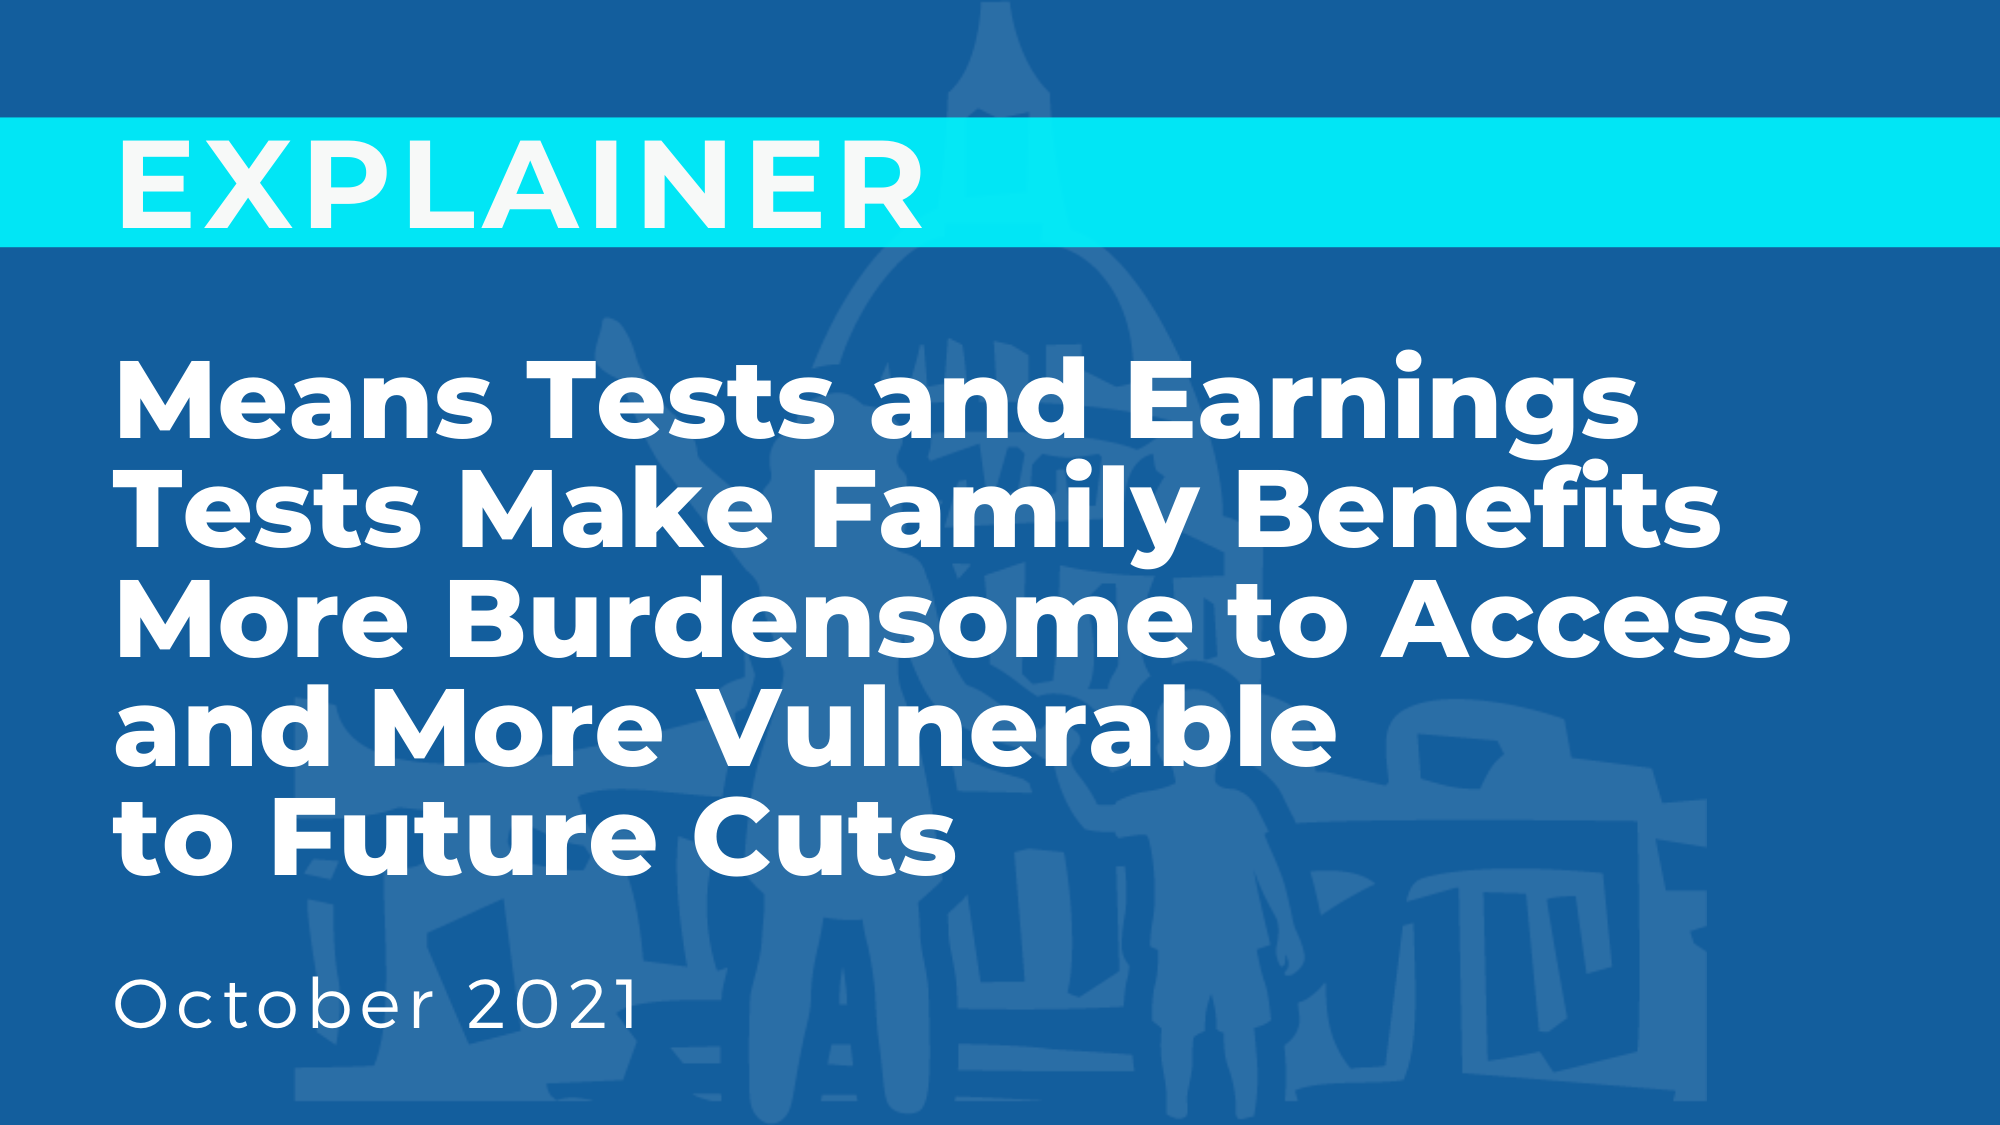 Means Tests and Earnings Tests Make Family Benefits More Burdensome to Access and More Vulnerable to Future Cuts